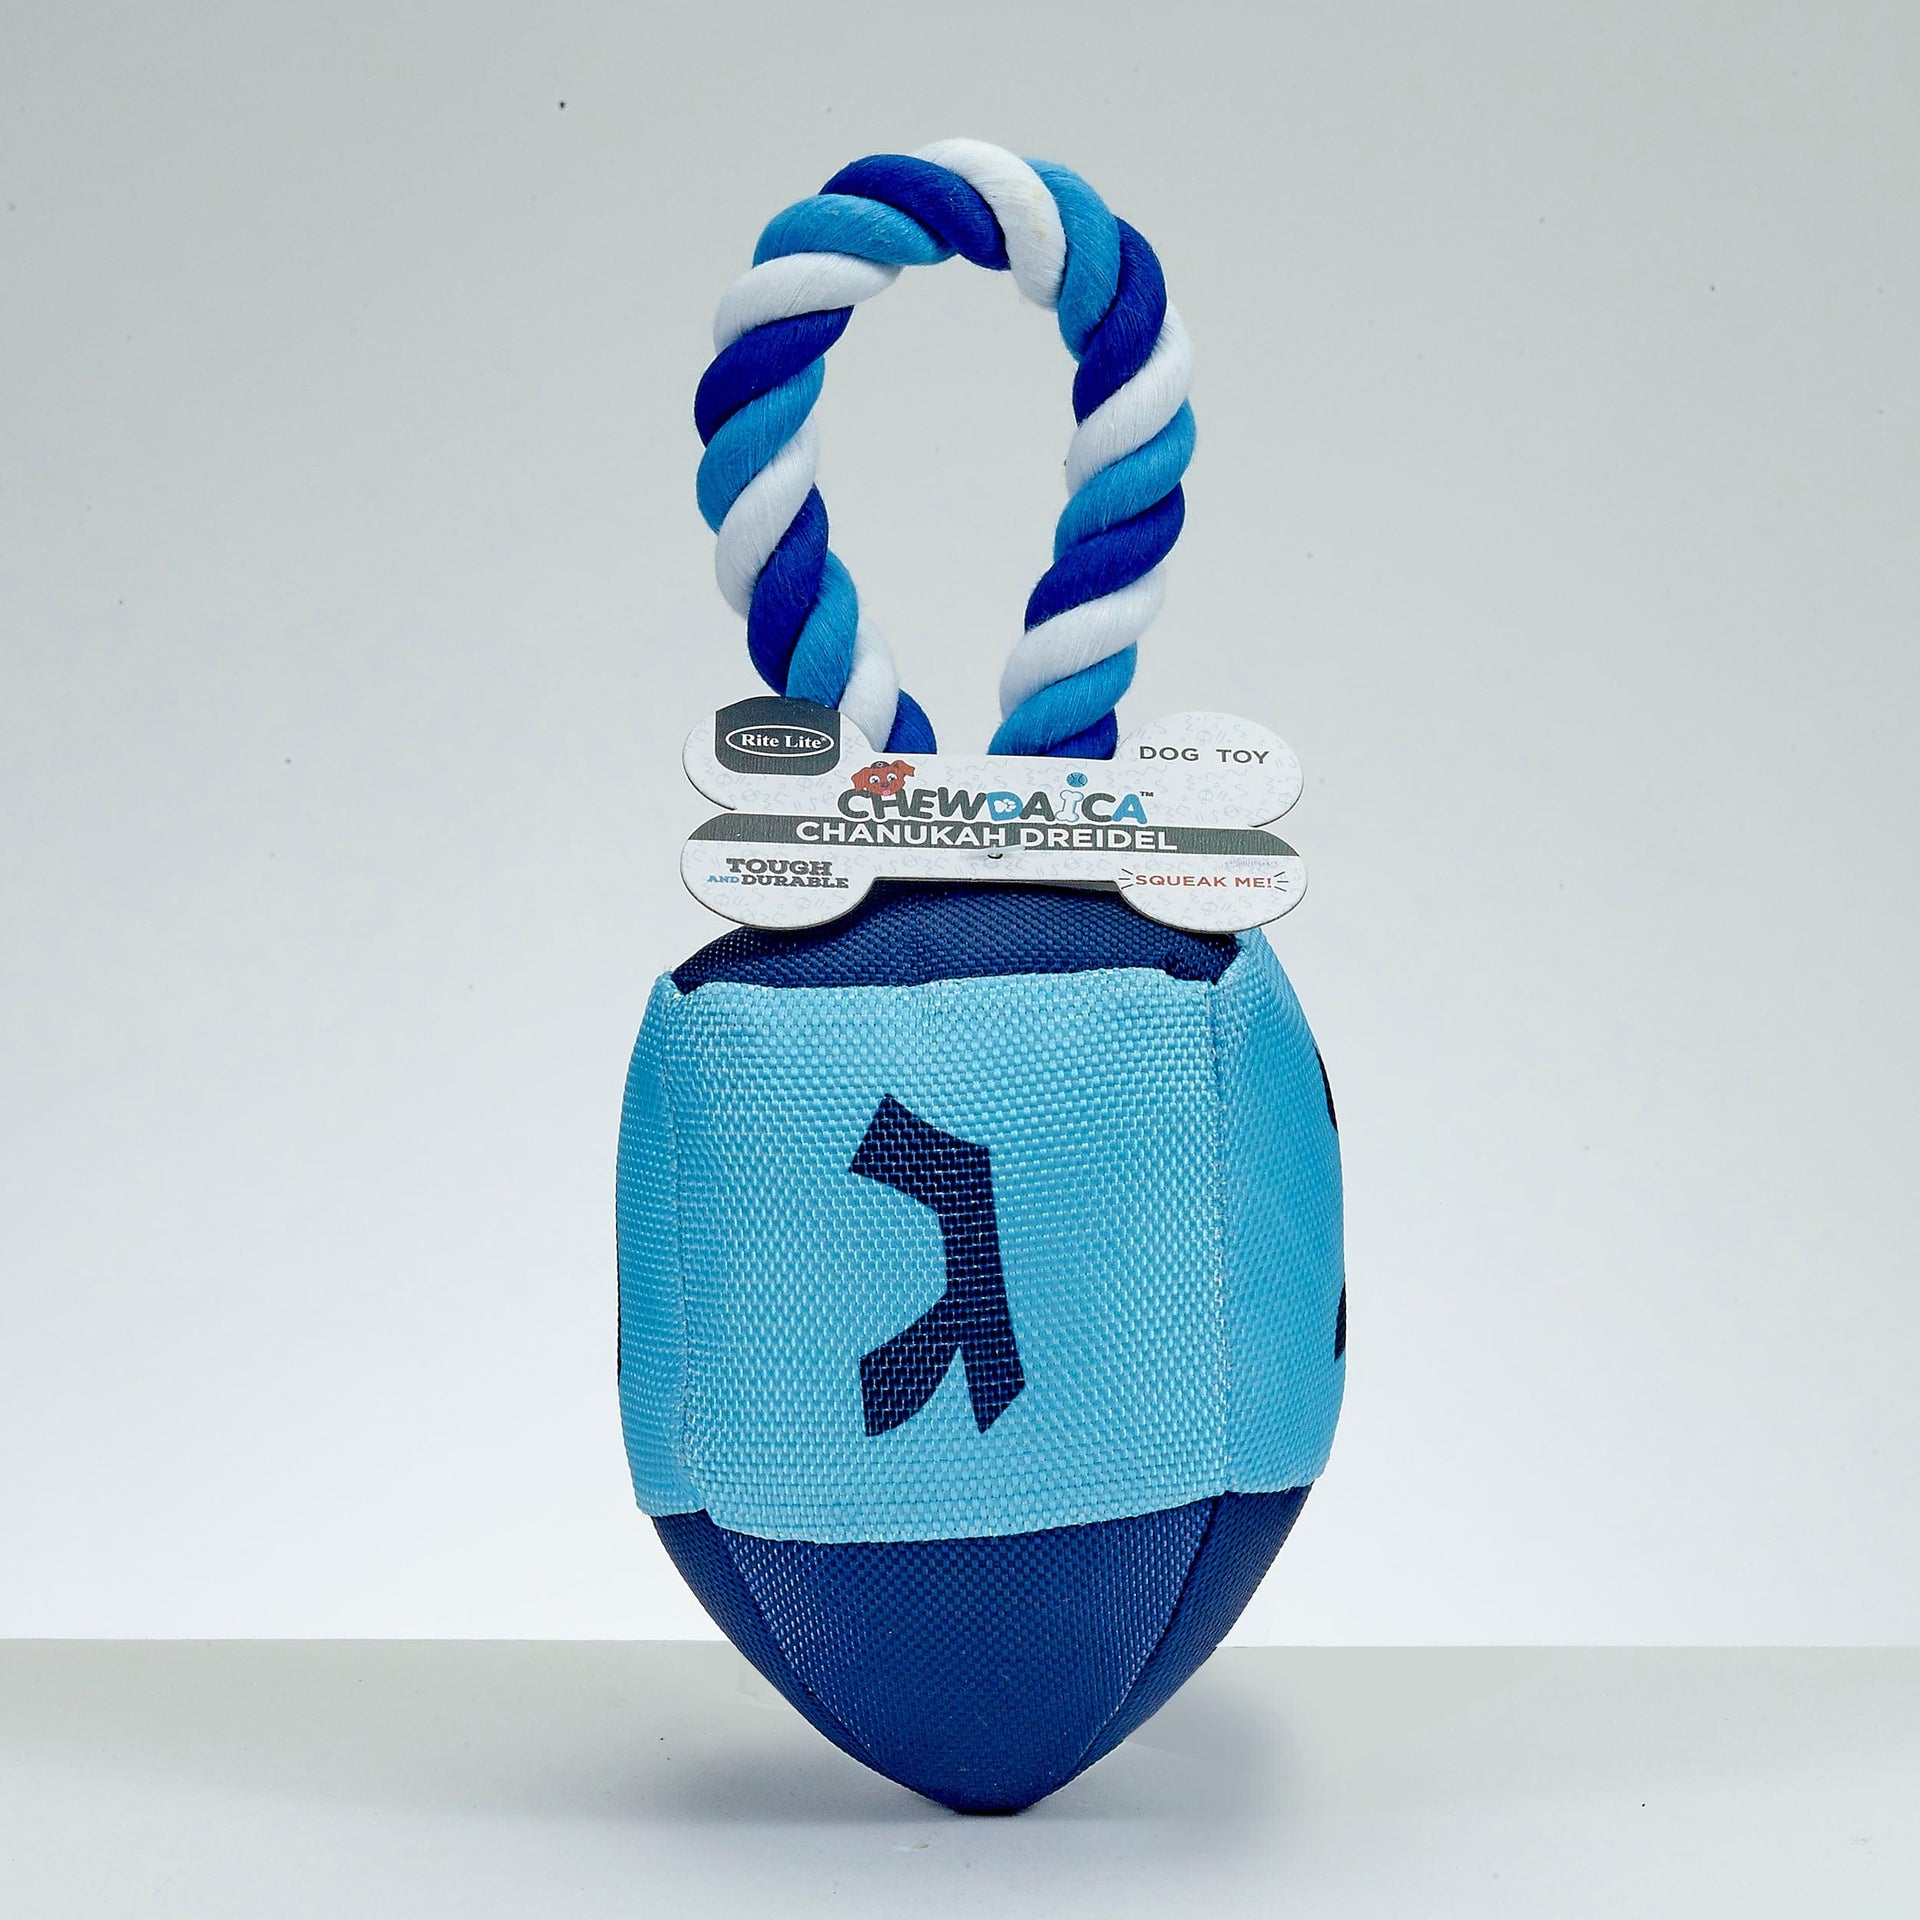 Rite Lite Pet Toys "Chewdaica"™ Oxford Dreidel Squeaky Dog Toy With Rope